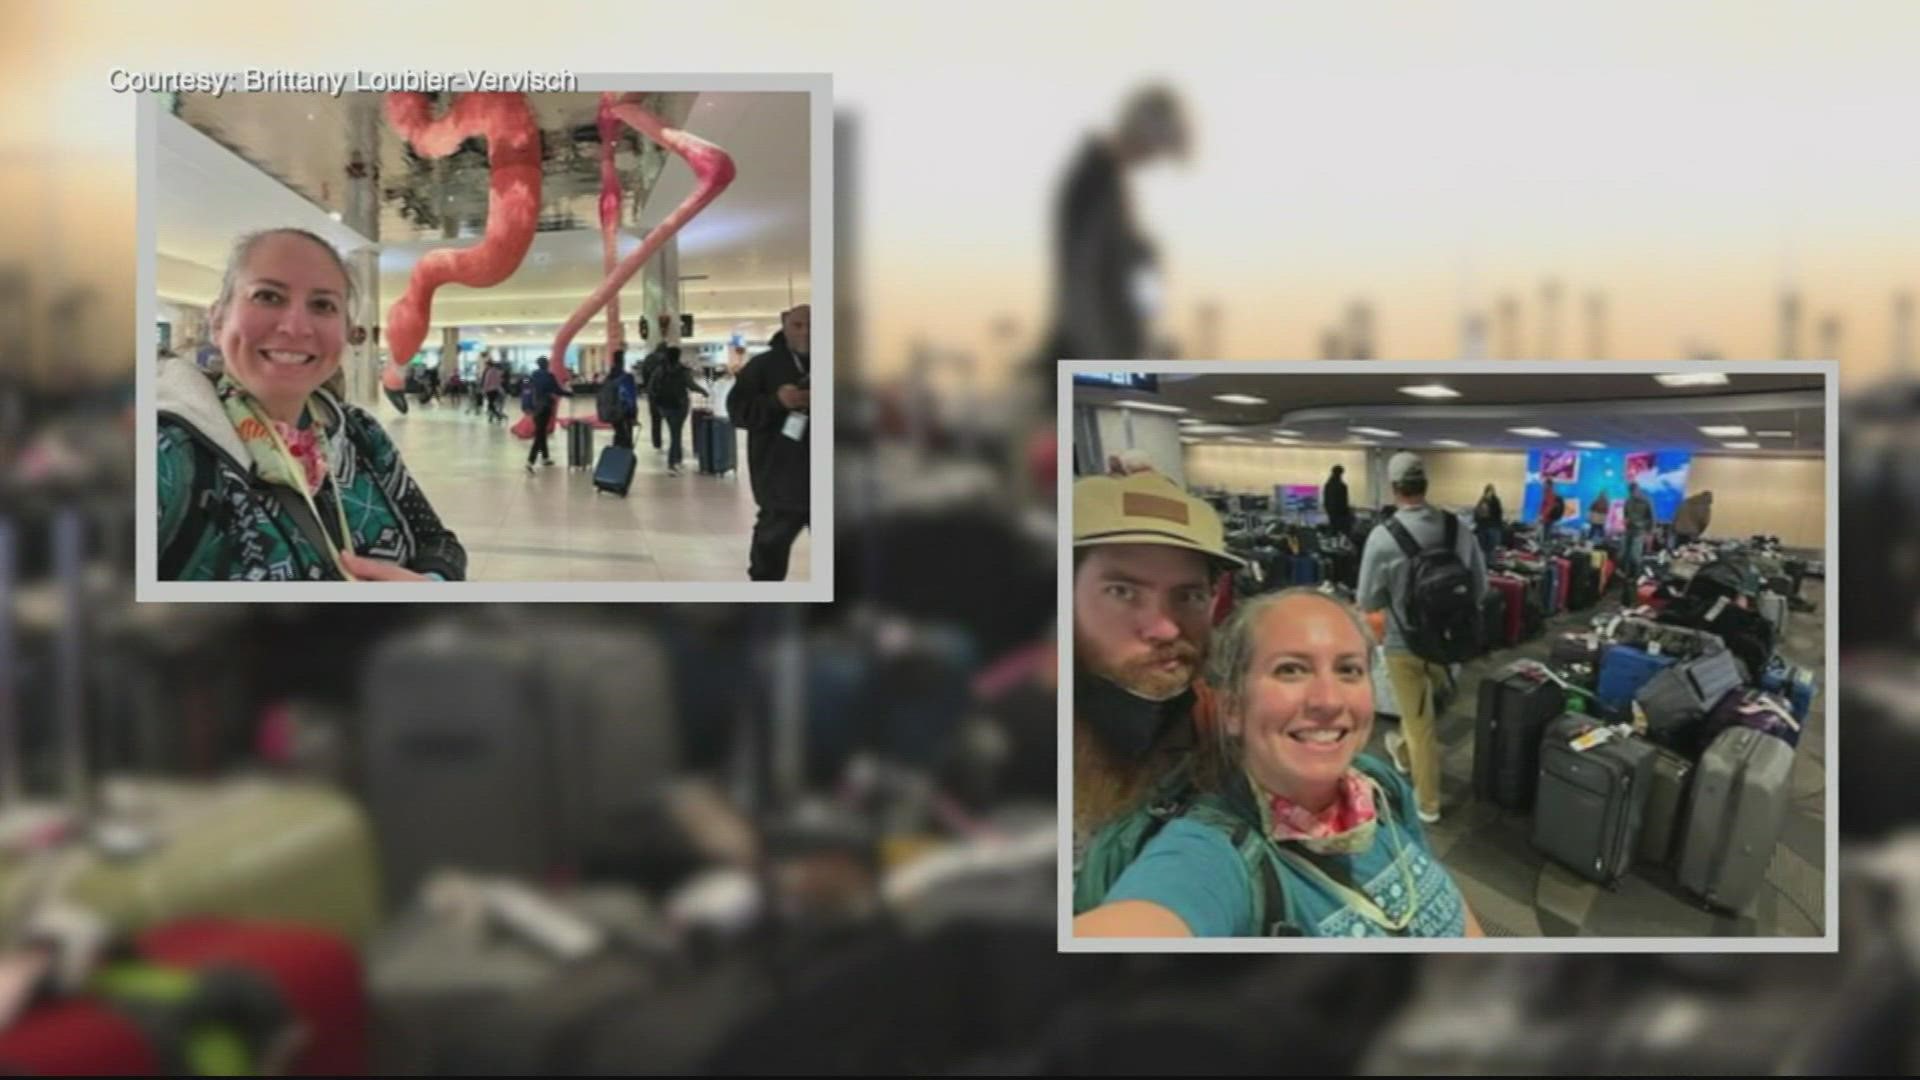 This woman helped reunite dozens of people with their bags during a hectic holiday season.